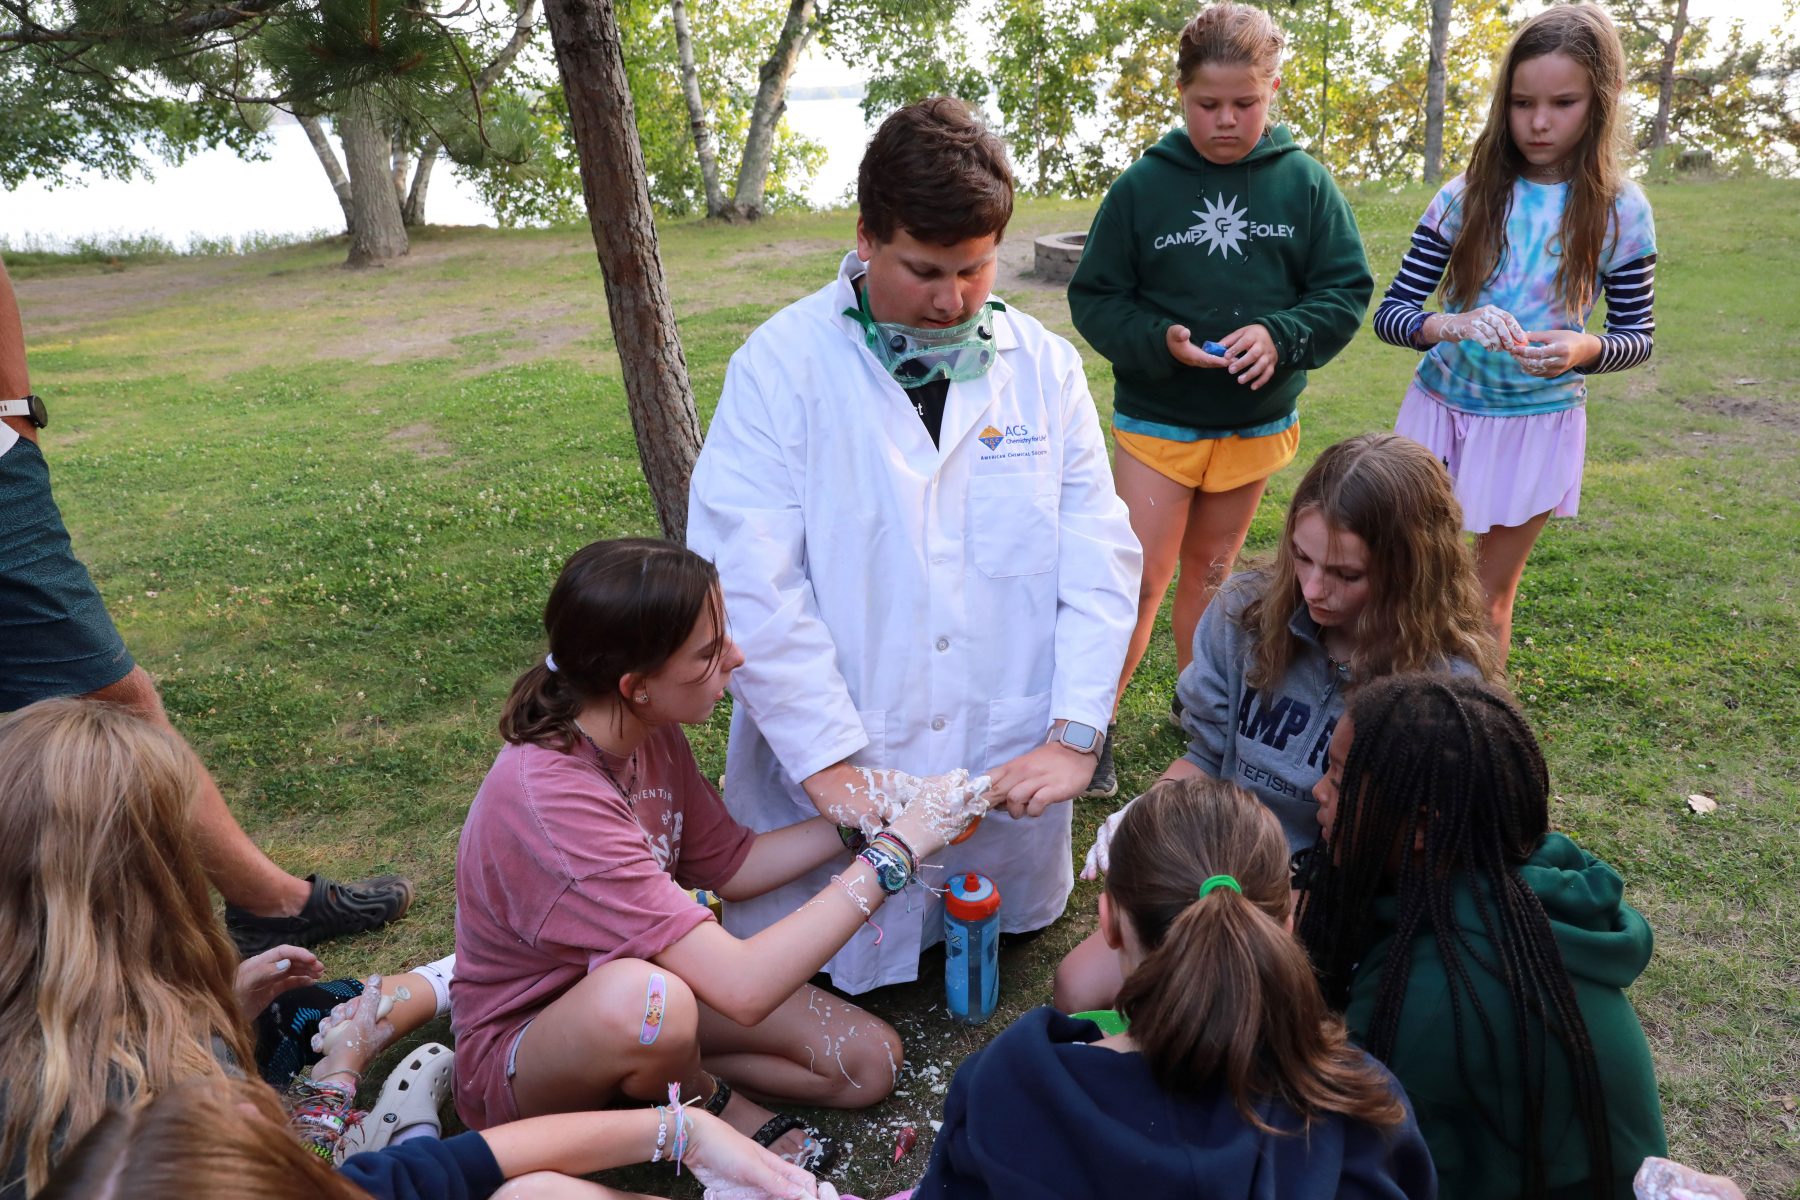 Man in a science lab coat sits with campers in a circle, with a girl to his right shows him her hands covered in slime at Camp Foley 